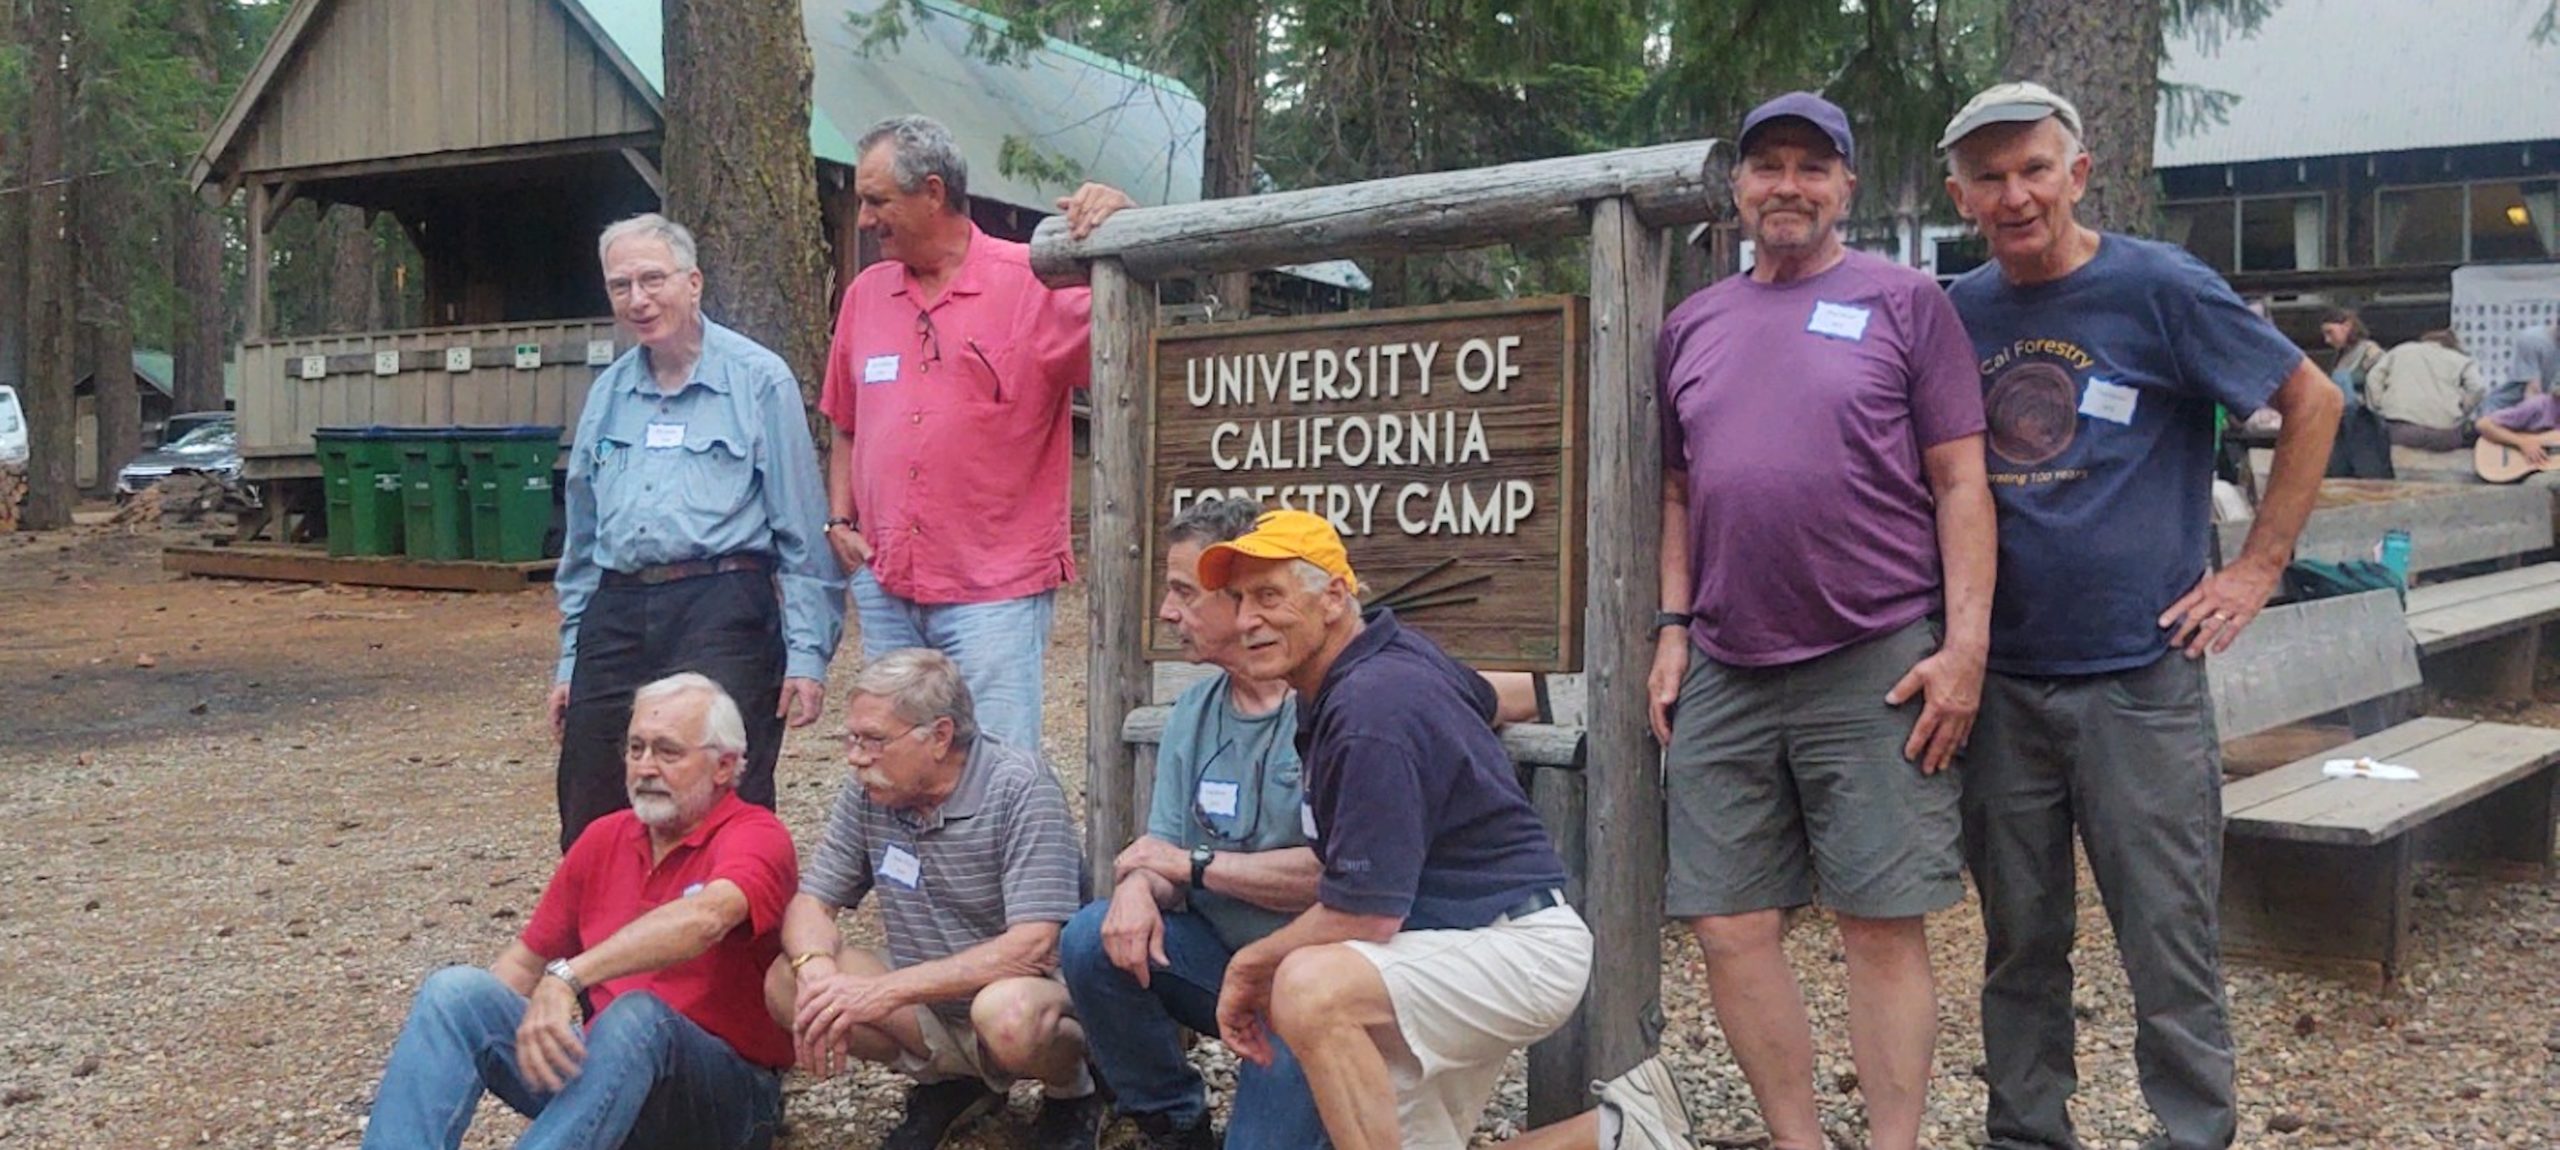 Men next to a sign and cabins